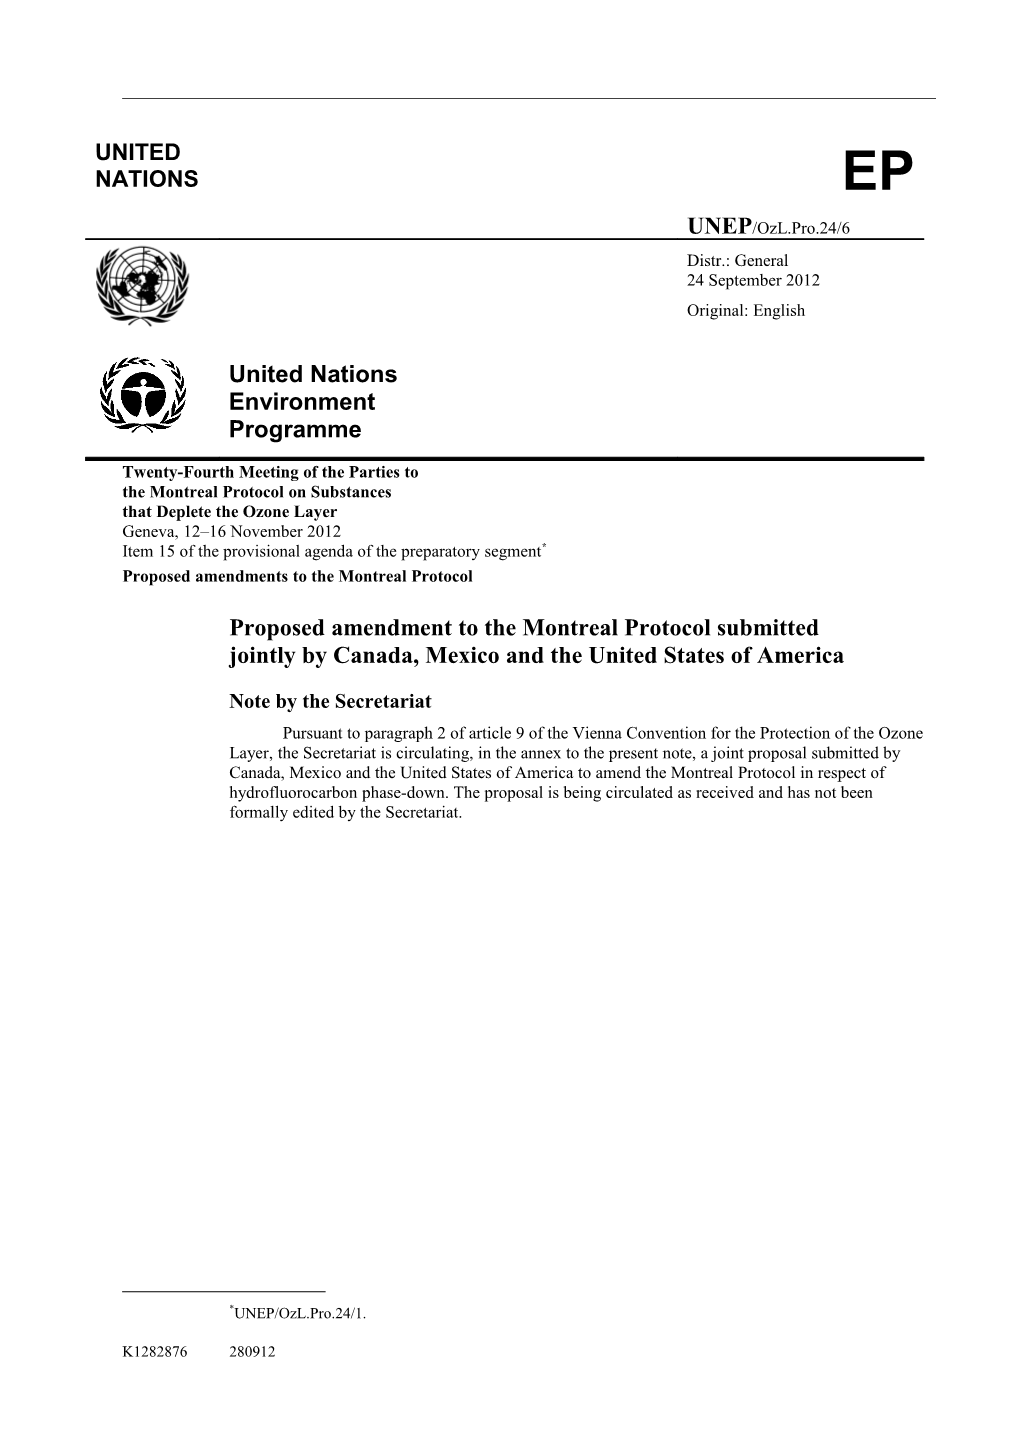 Proposed Amendment to the Montreal Protocol Submitted Jointly by Canada, Mexico and The